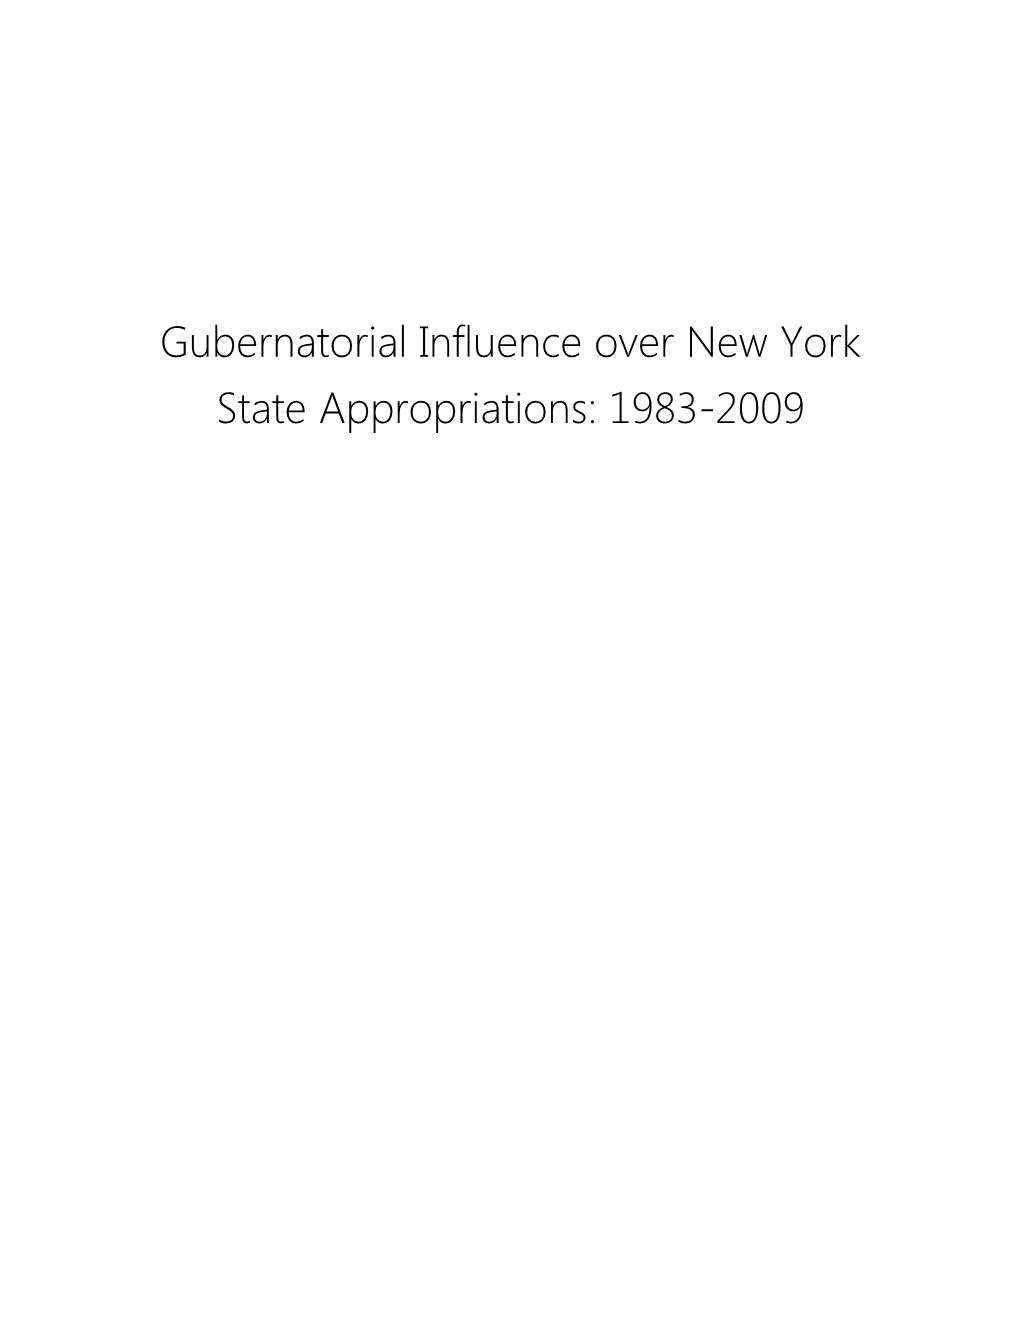 Gubernatorial Influence Over New York State Appropriations: 1983-2009